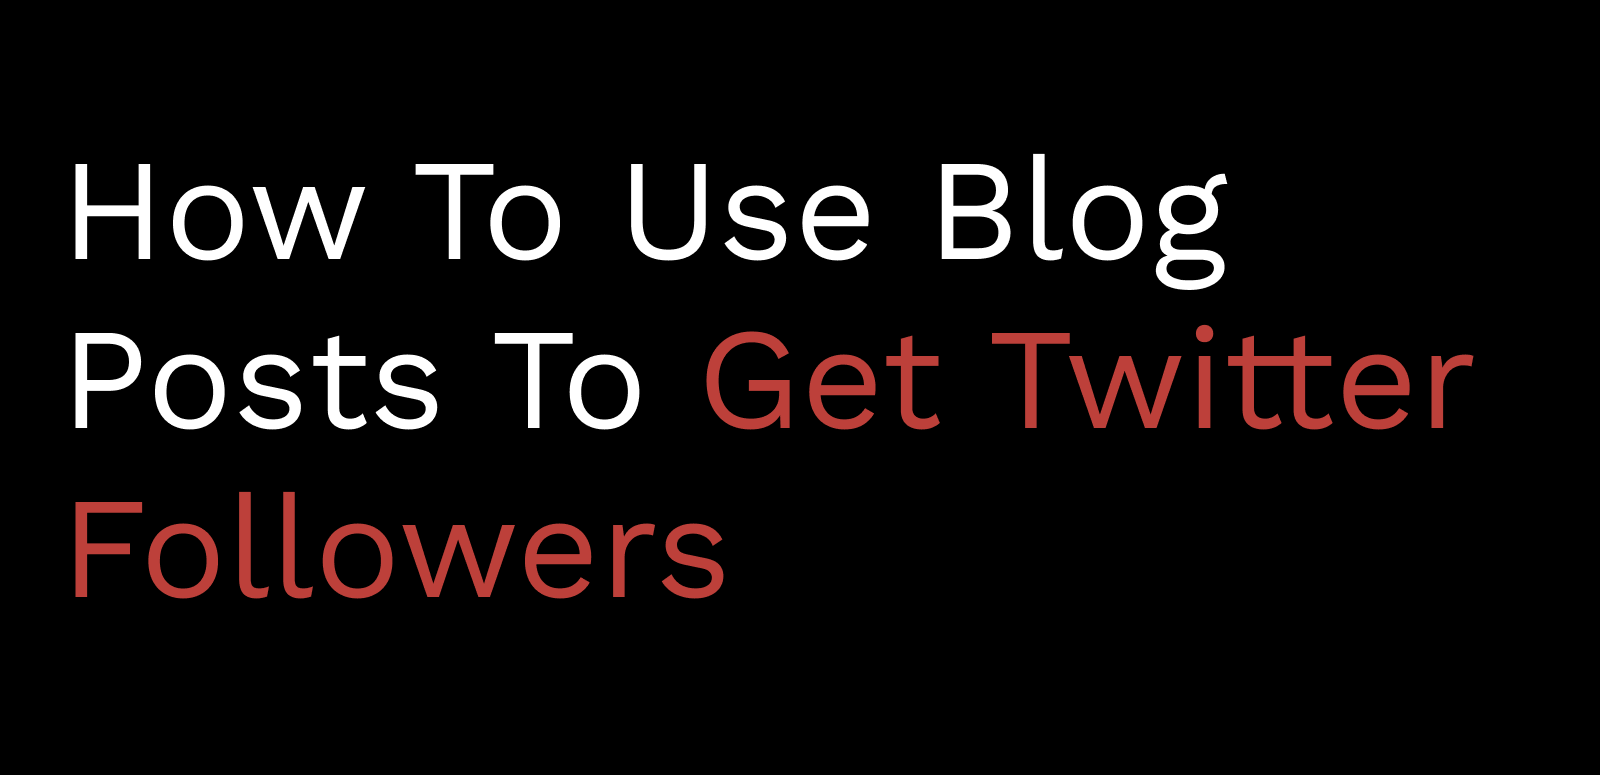 How To Use Blog Posts To Get Twitter Followers